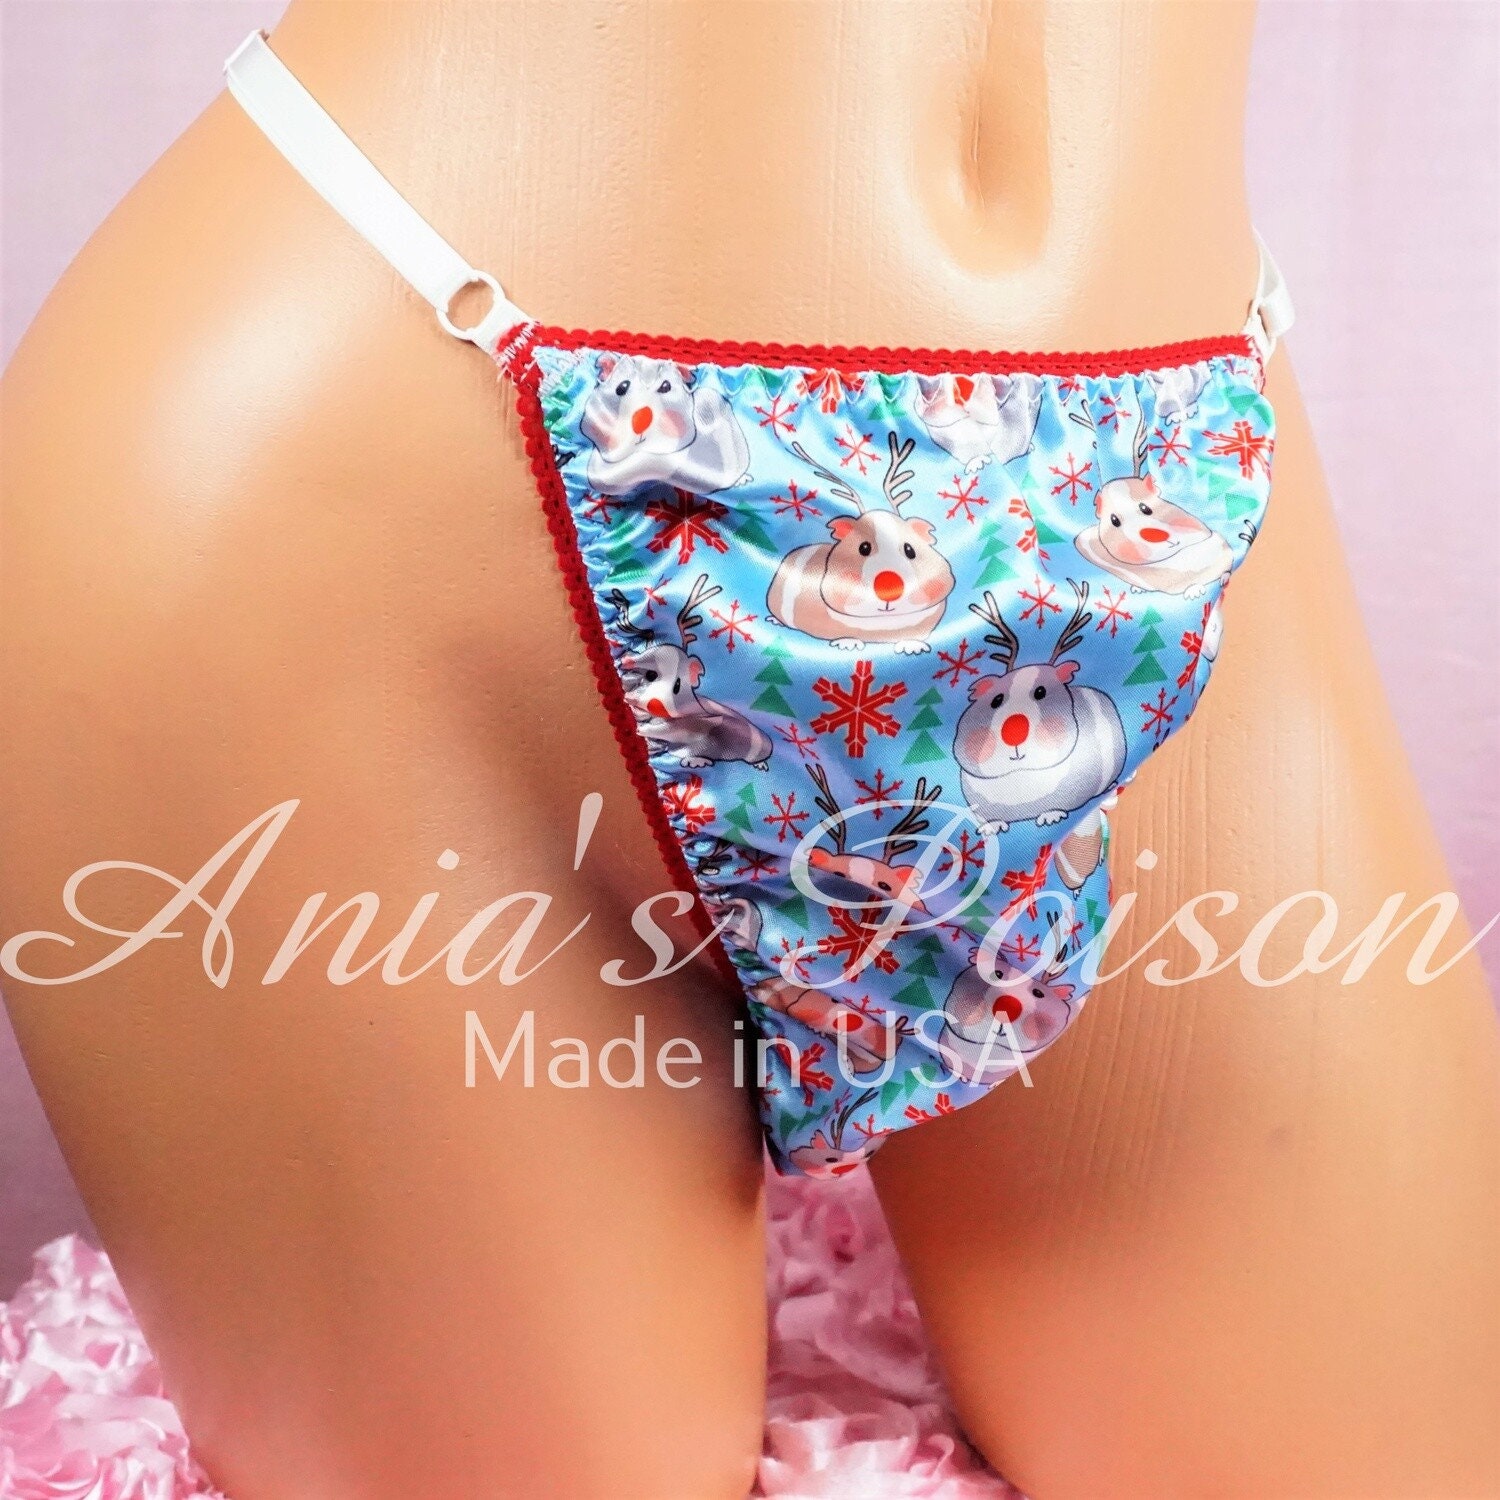 FLOSS BITCH THONG Funny Underwear Panties Whale Tail Words On Back